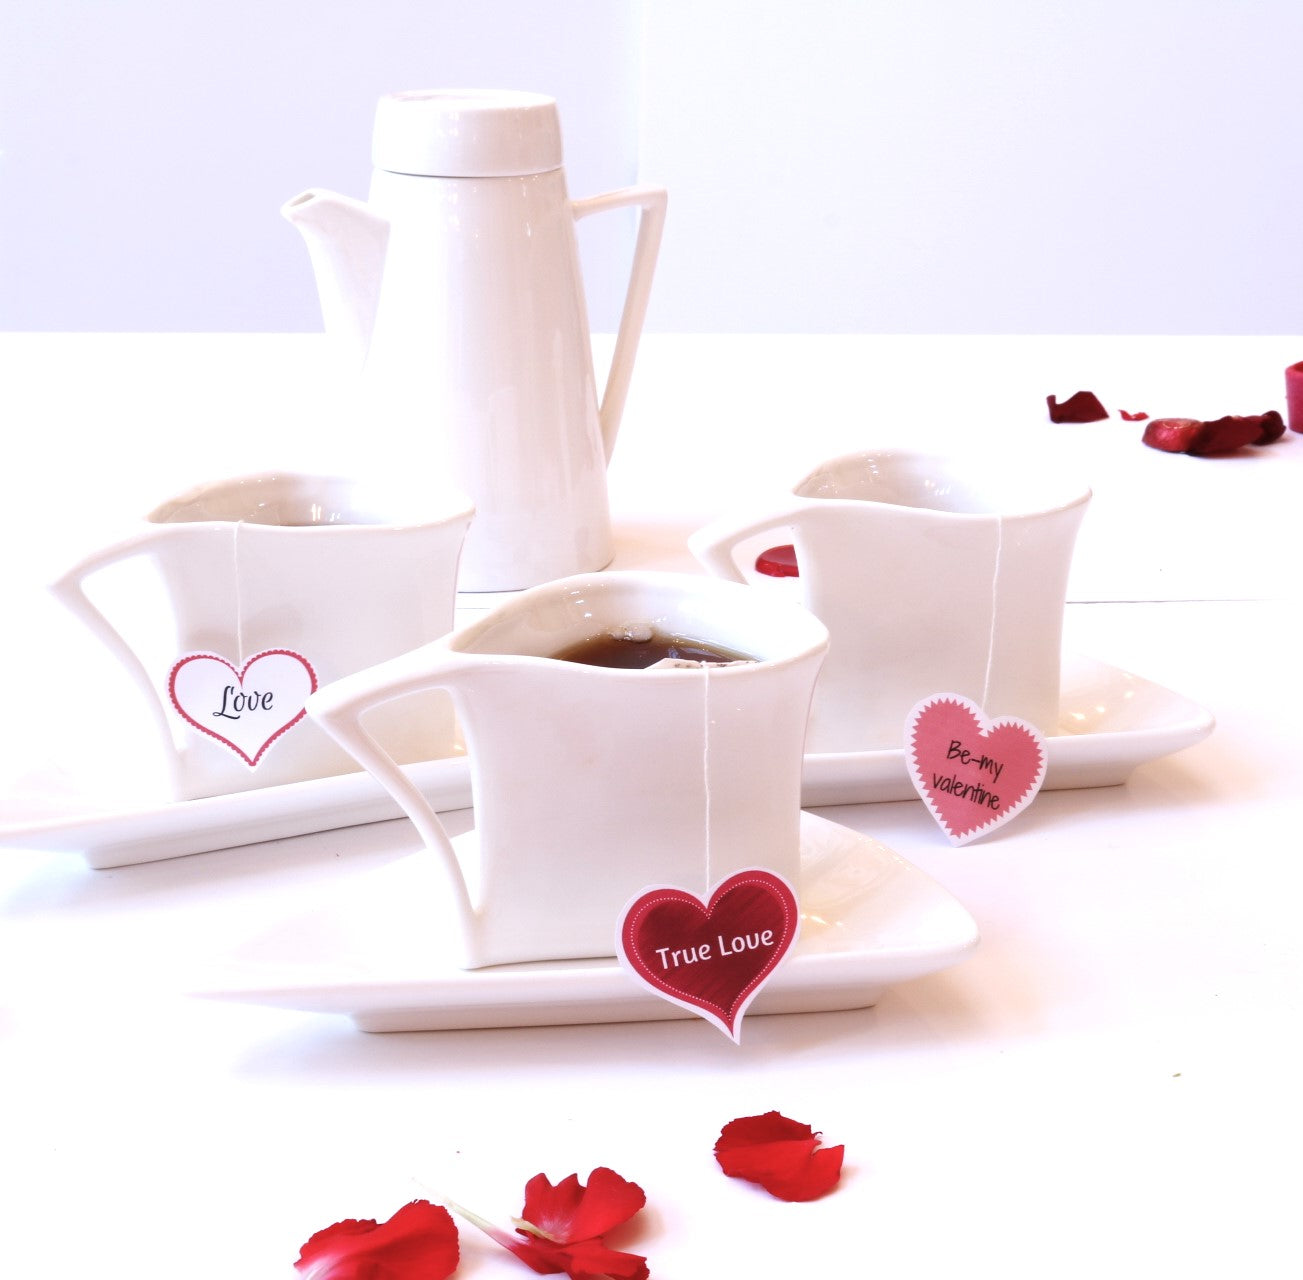 Sweet Valentine Tags for Your Tea Sets